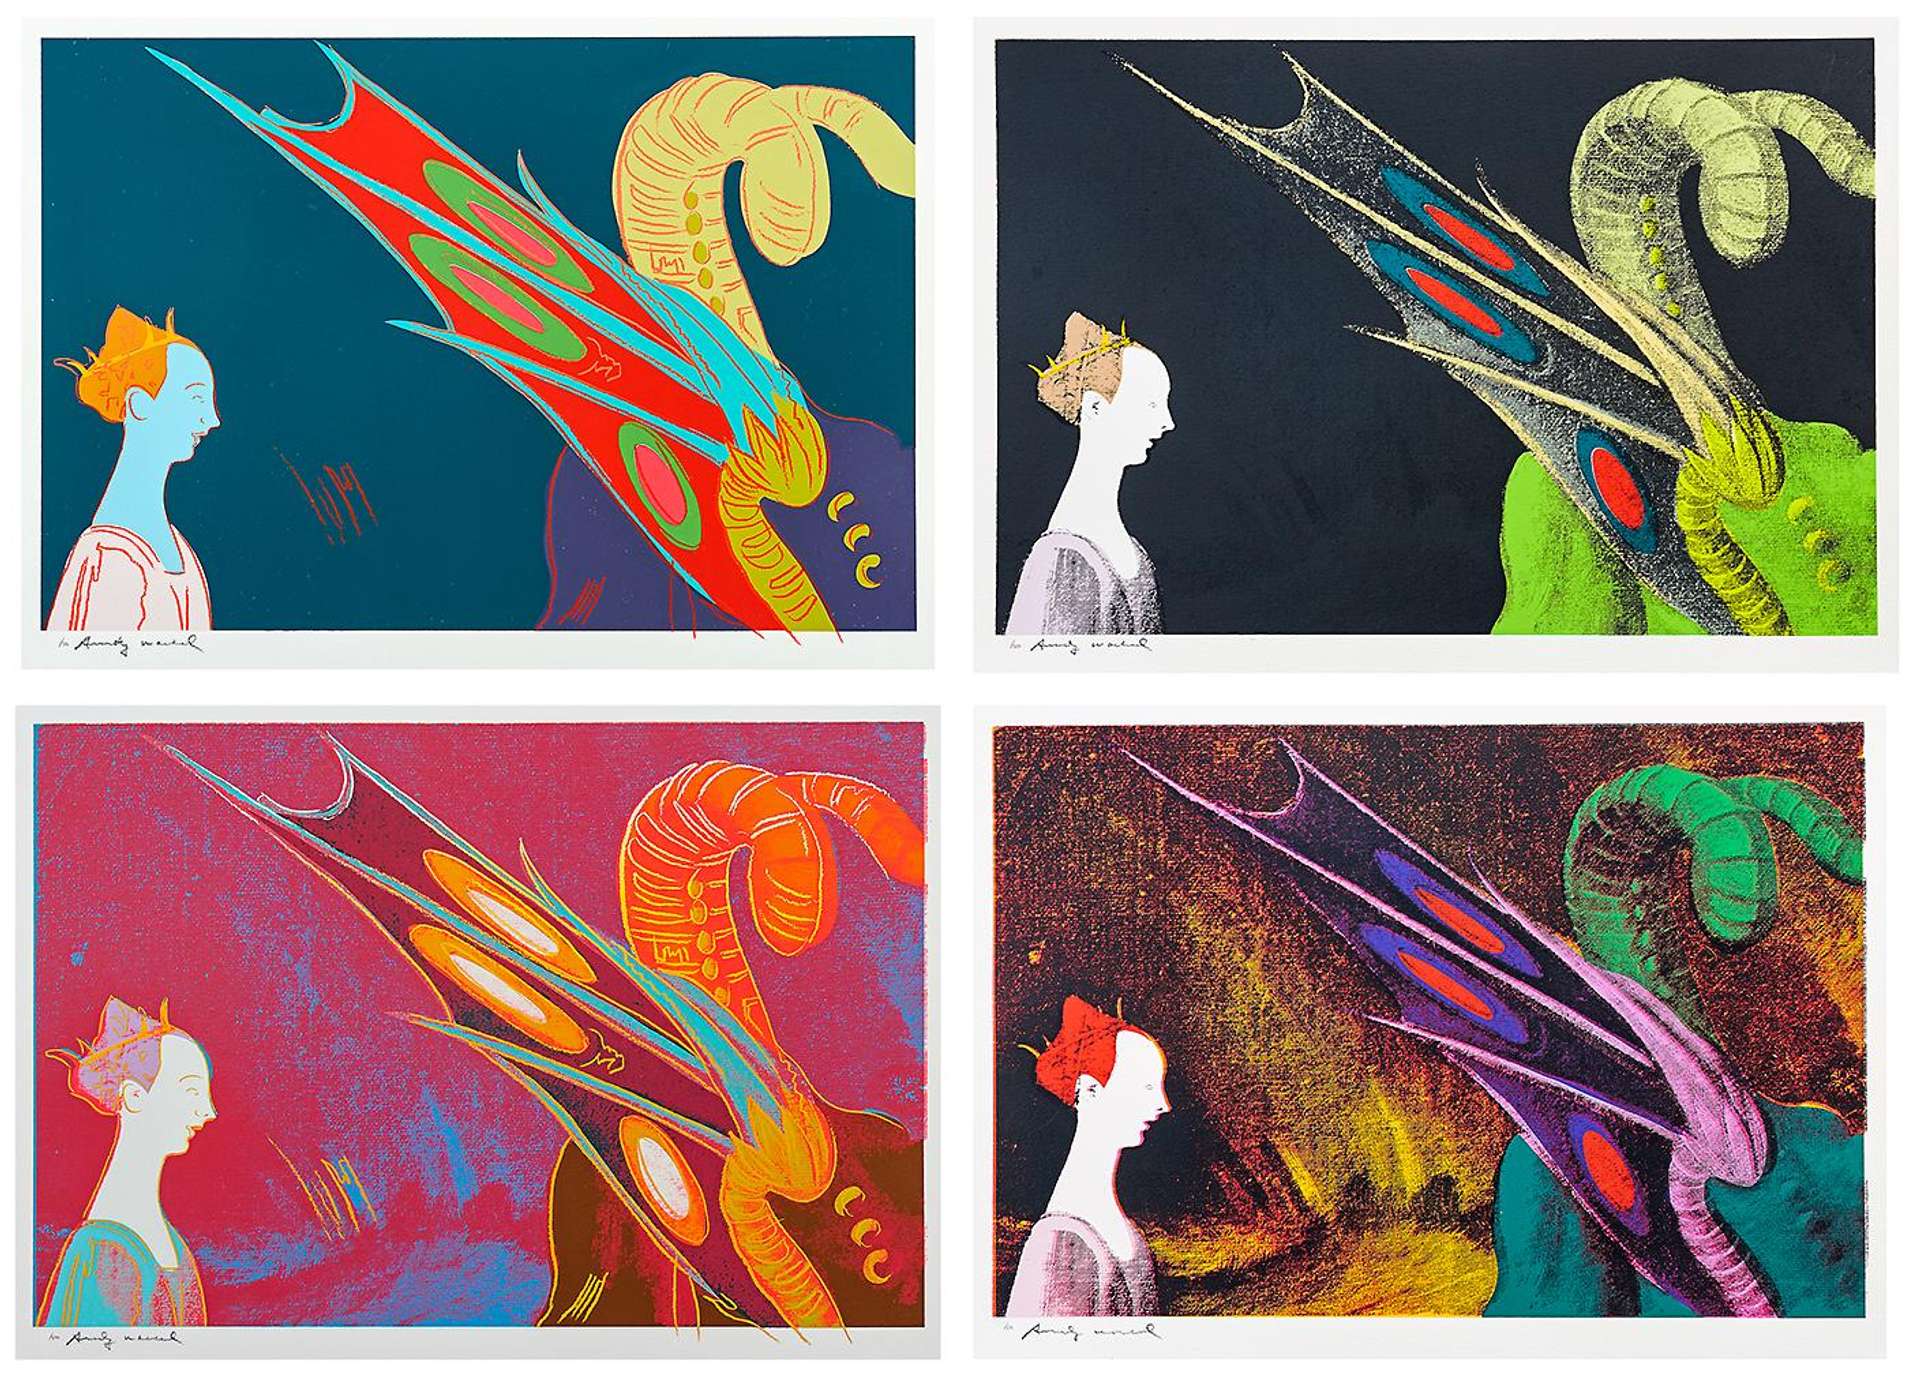 An image of the complete set of Warhol's interpretations of Paolo Uccello's maiden and dragon, in four different colourways.